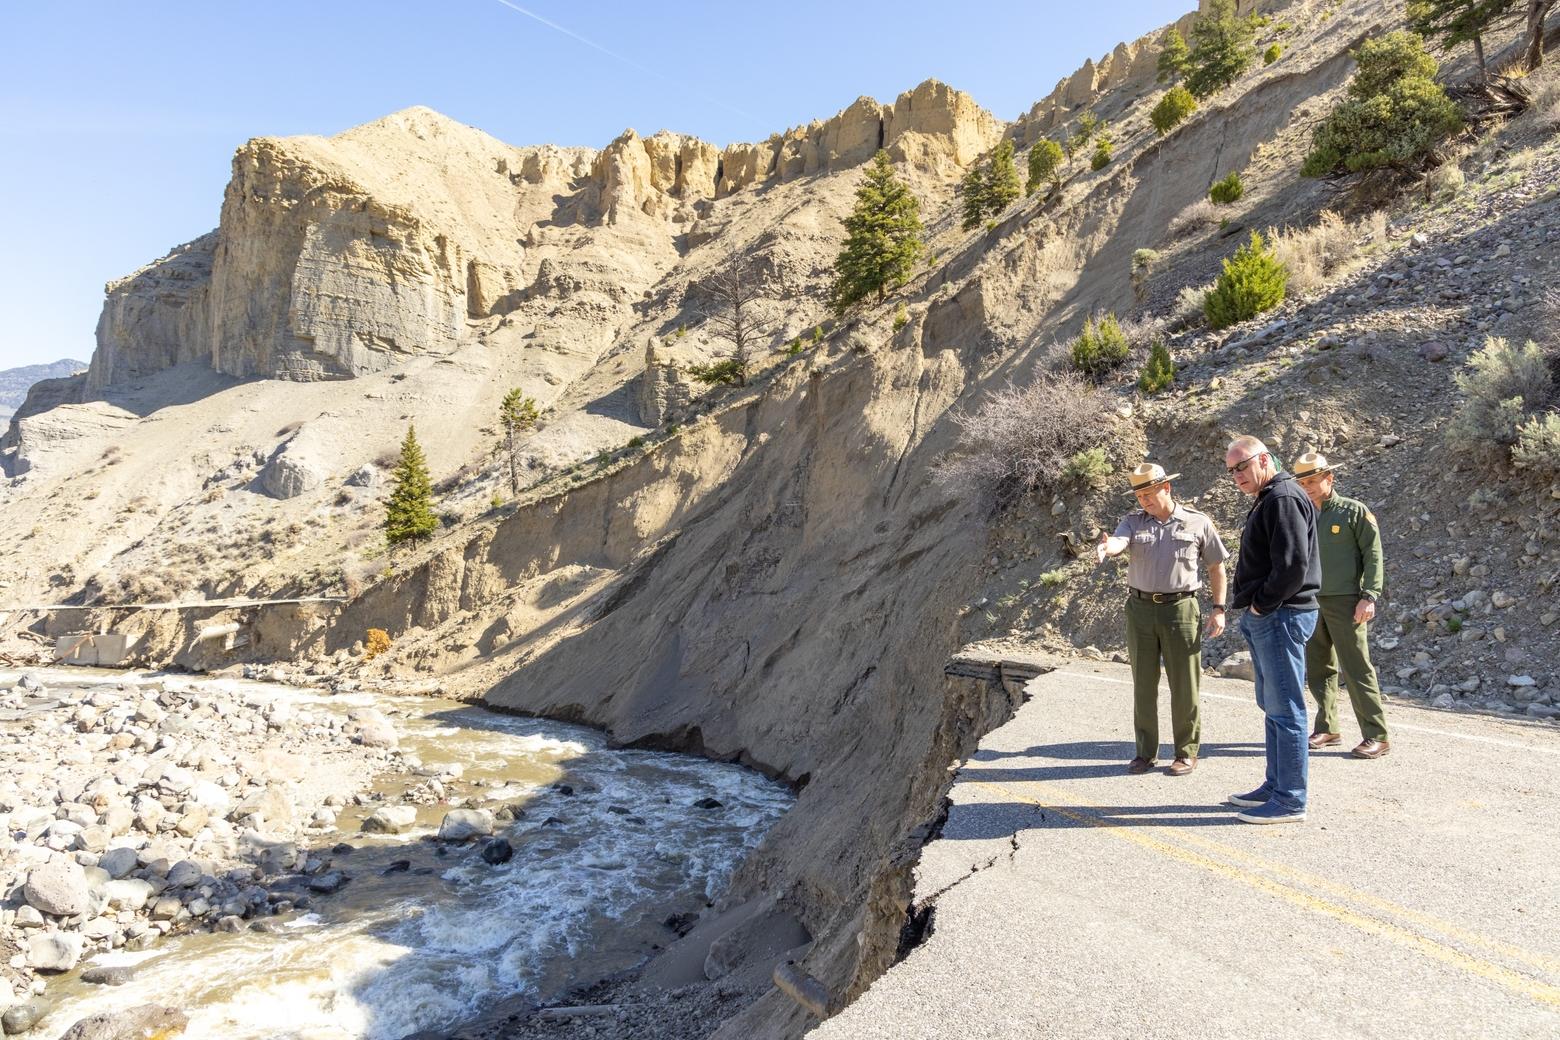 Sholly surveys the damage in Yellowstone with Congressman Ryan Zinke a year after the 2022 flooding that the National Parks Service called a "500-year flood" that cost nearly $1 billion in repairs. Photo by Jacob W. Frank